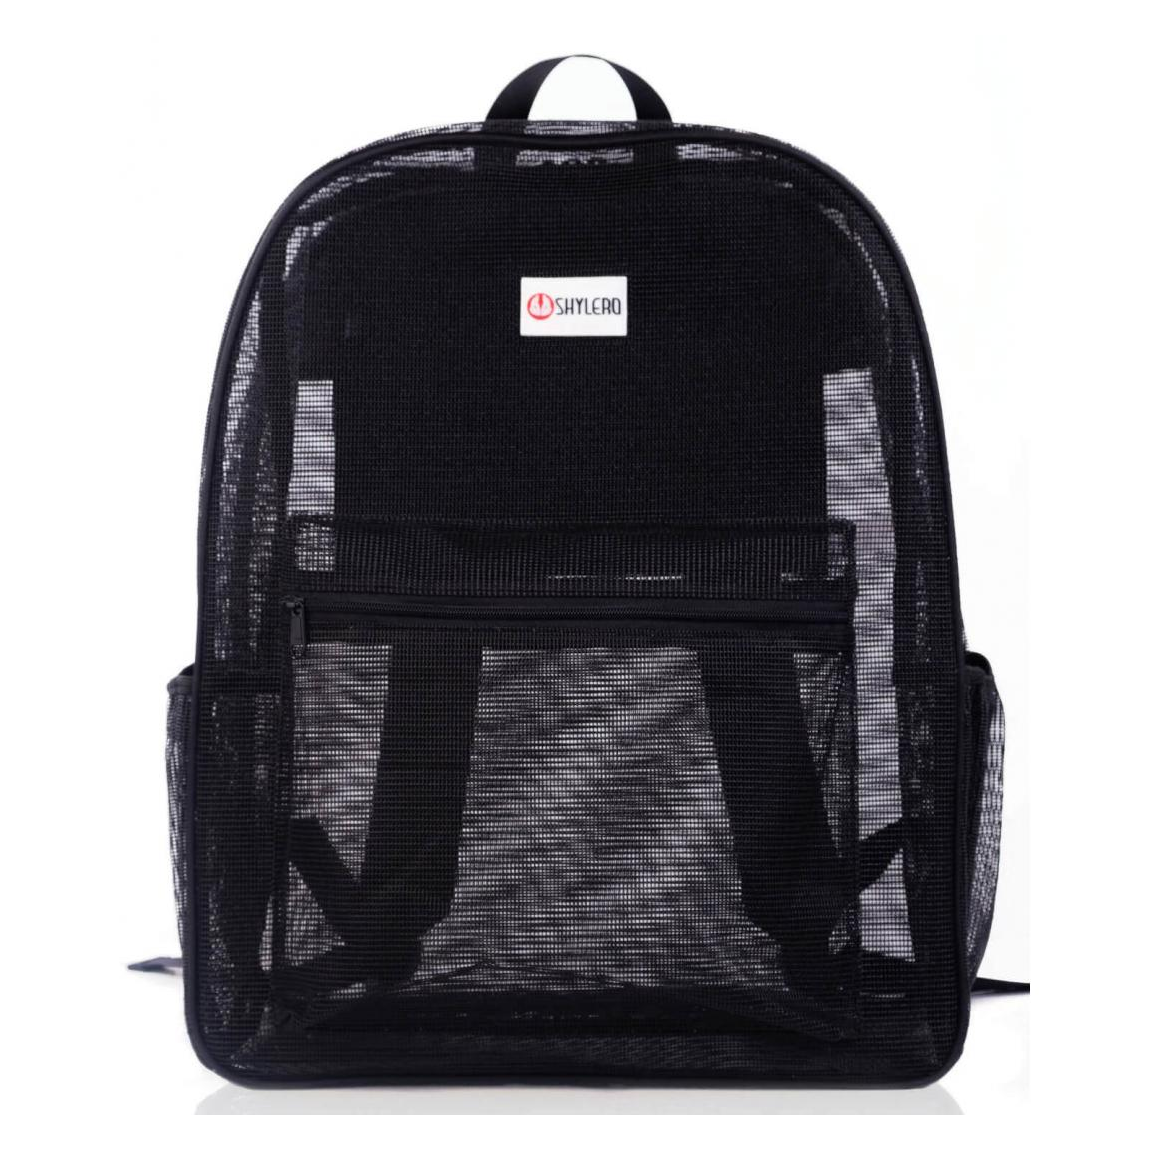 SHYLERO XXL Mesh Backpack Front View